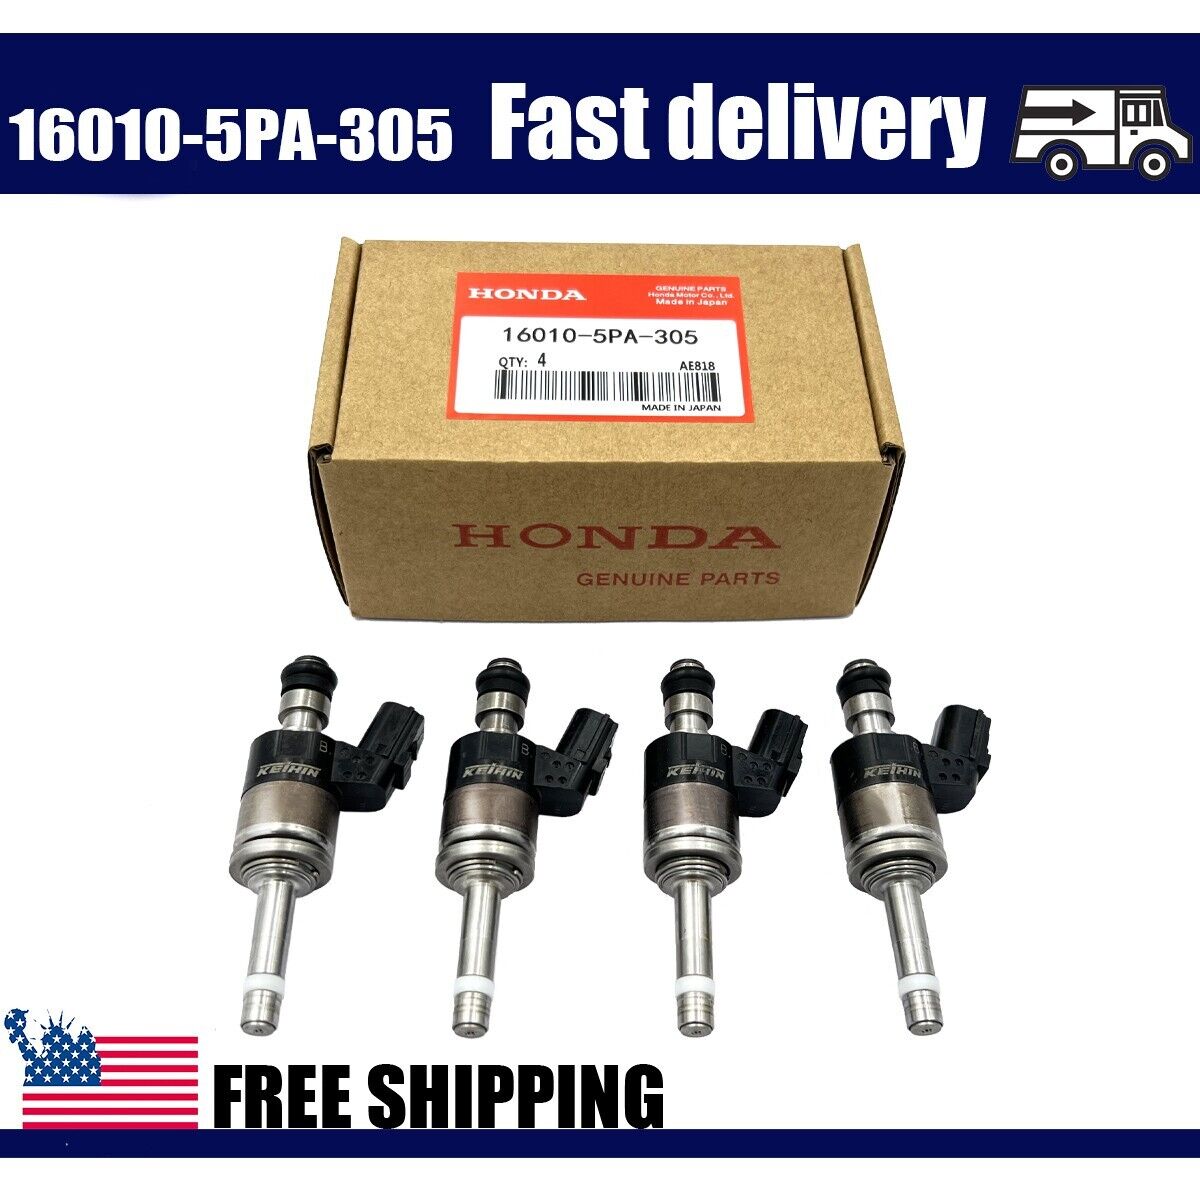 OEM NEW 4X Genuine Fuel Injectors 16010-5PA-305 For Accord CR-V Civic 1.5l Turbo